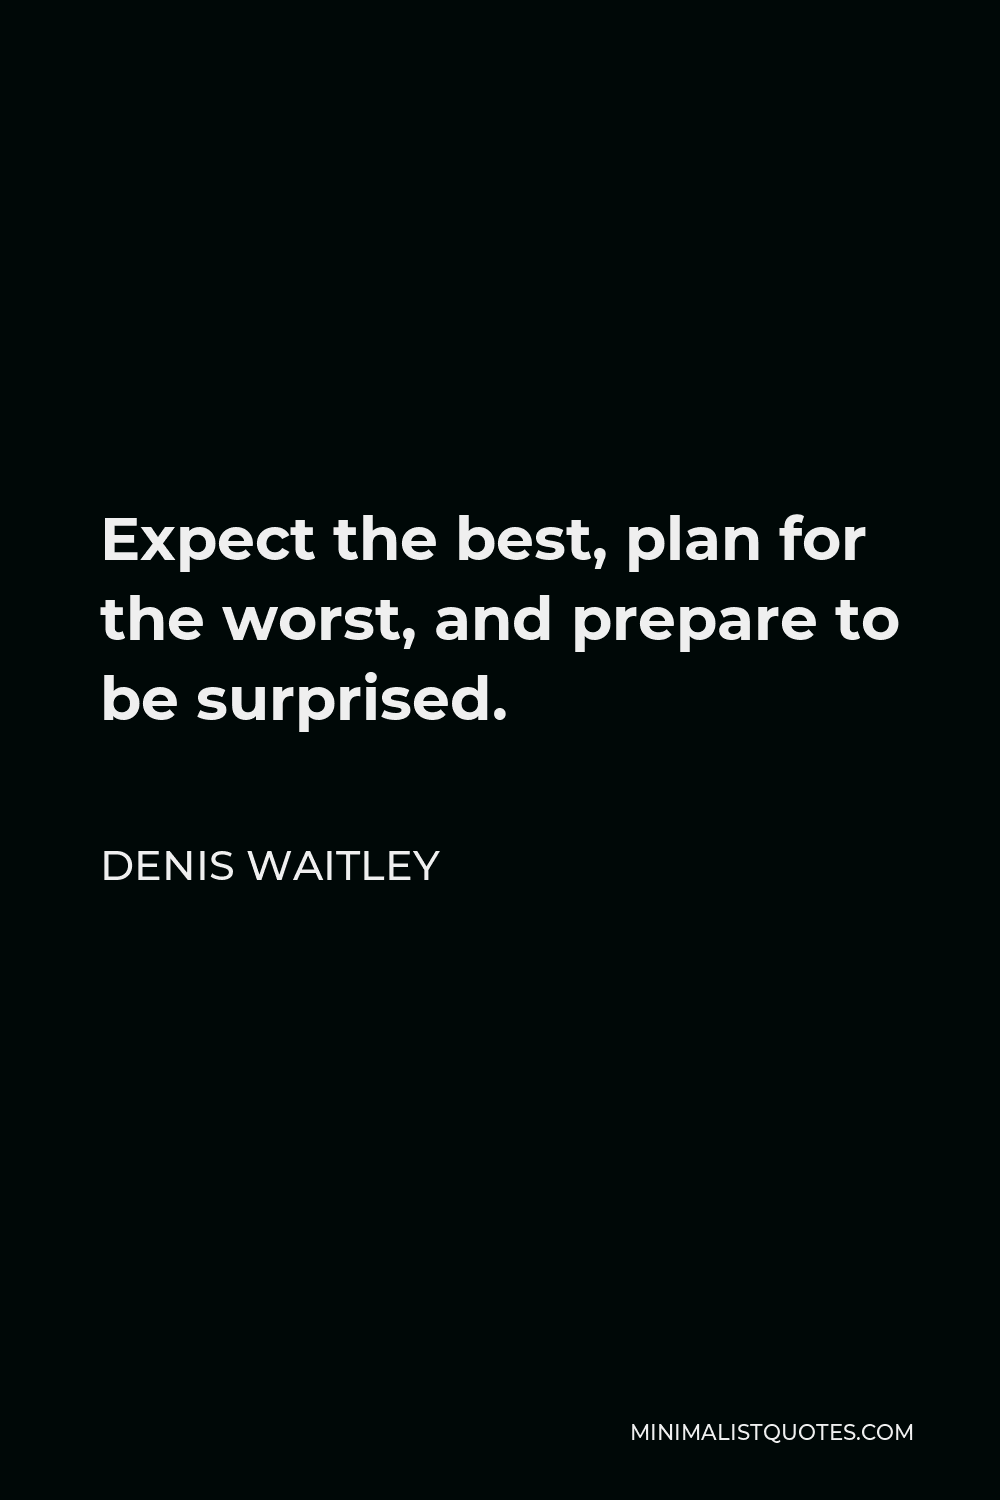 Denis Waitley Quote - Expect the best, plan for the worst, and prepare to be surprised.